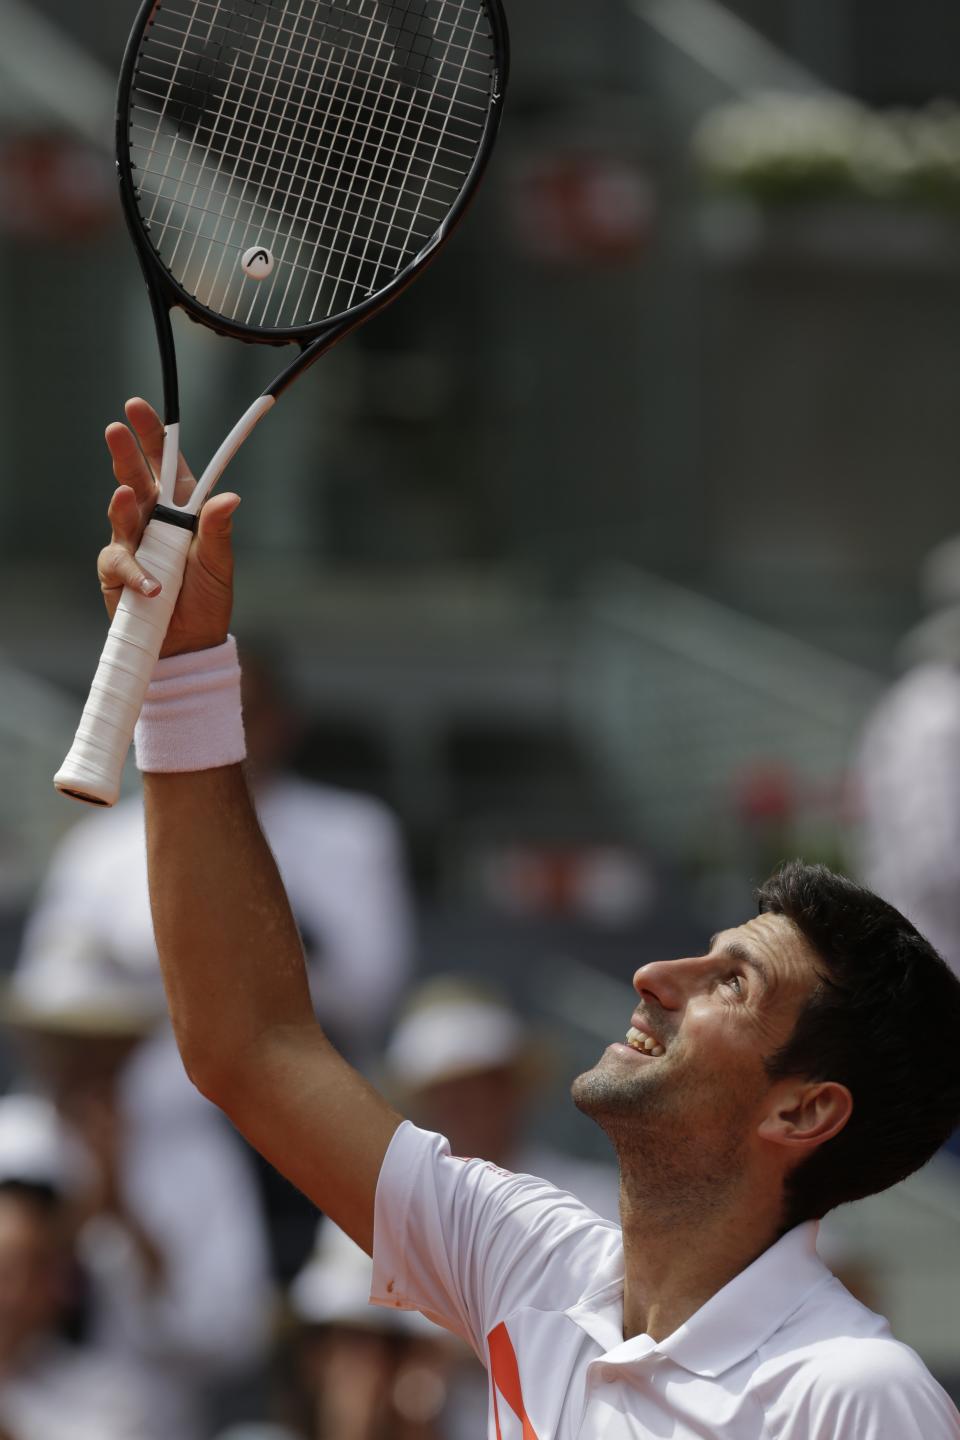 Novak Djokovic, from Serbia, celebrates after winning Taylor Fritz, from United States during the Madrid Open tennis tournament in Madrid, Tuesday, May 7, 2019. (AP Photo/Bernat Armangue)